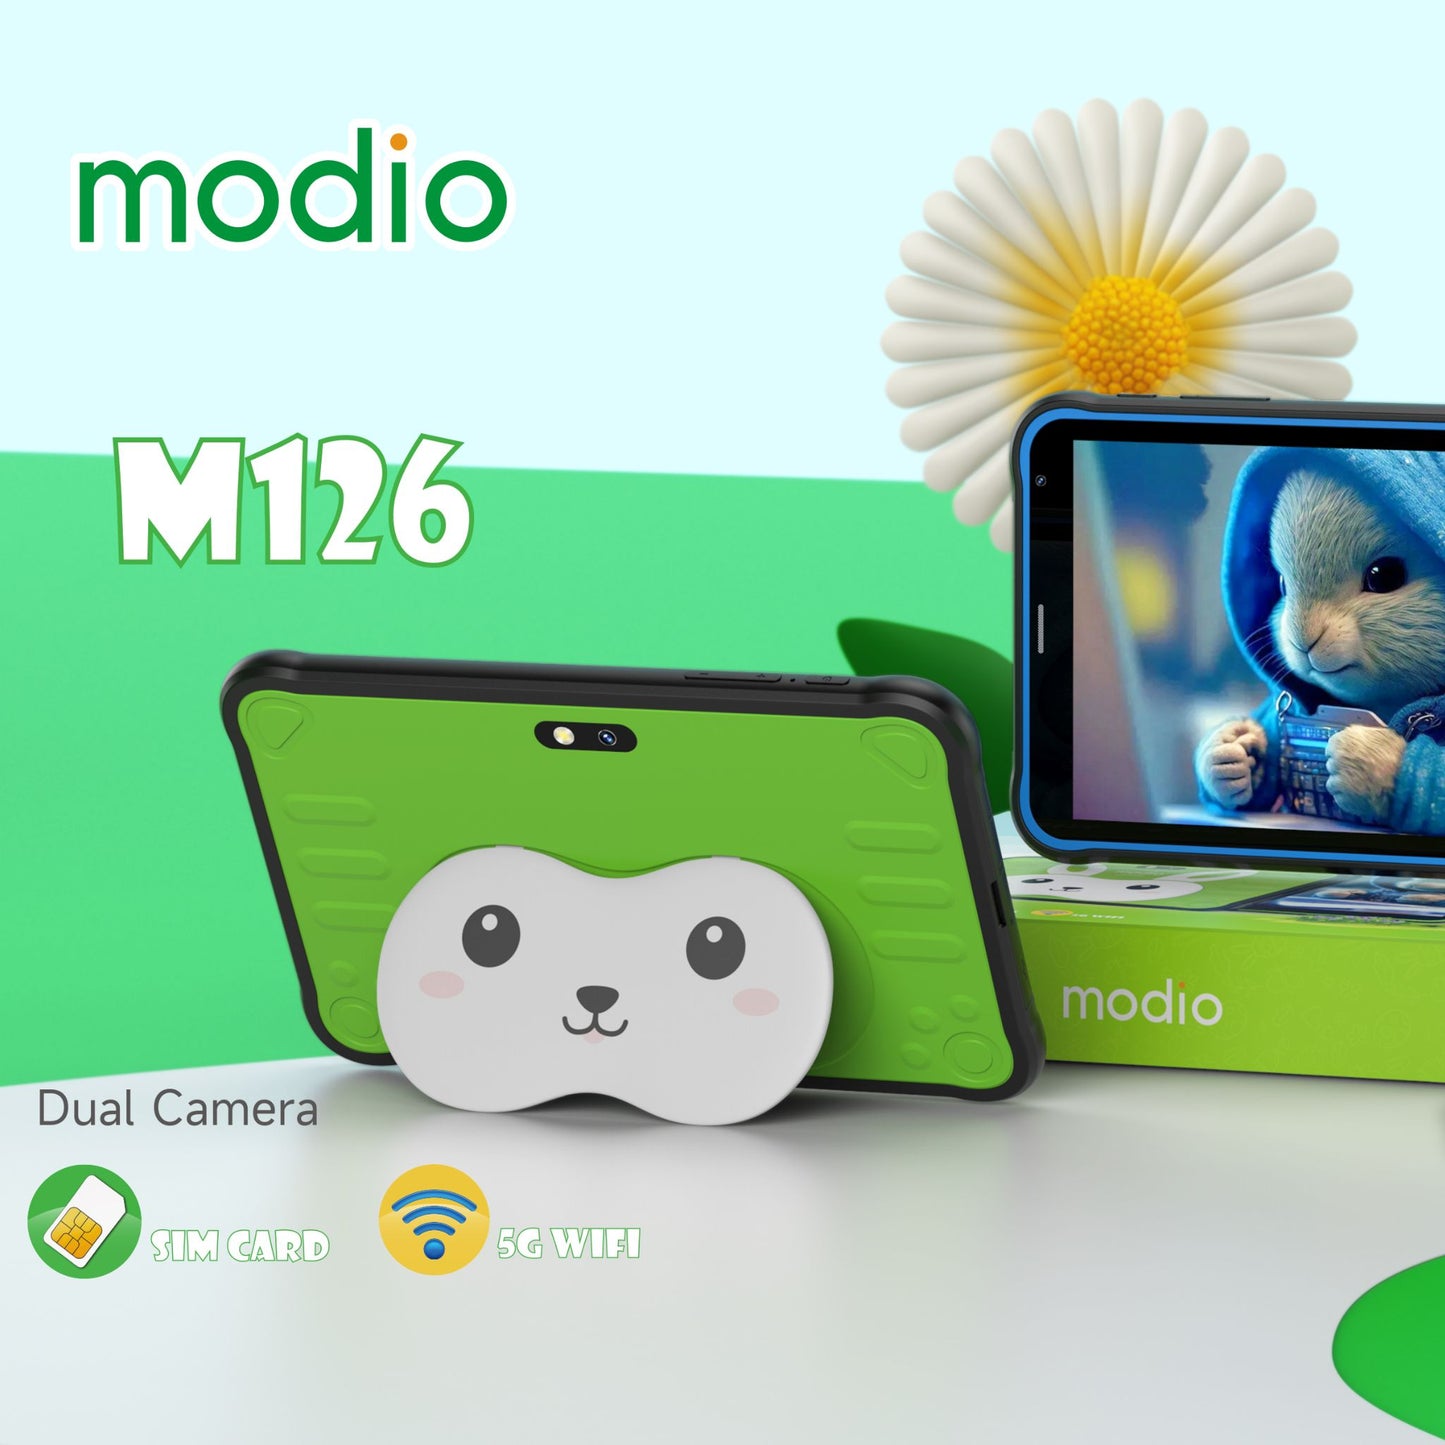 Modio M126 5G (6GB+256 GB) 8Inch Dual Camera Android Tablet_Black